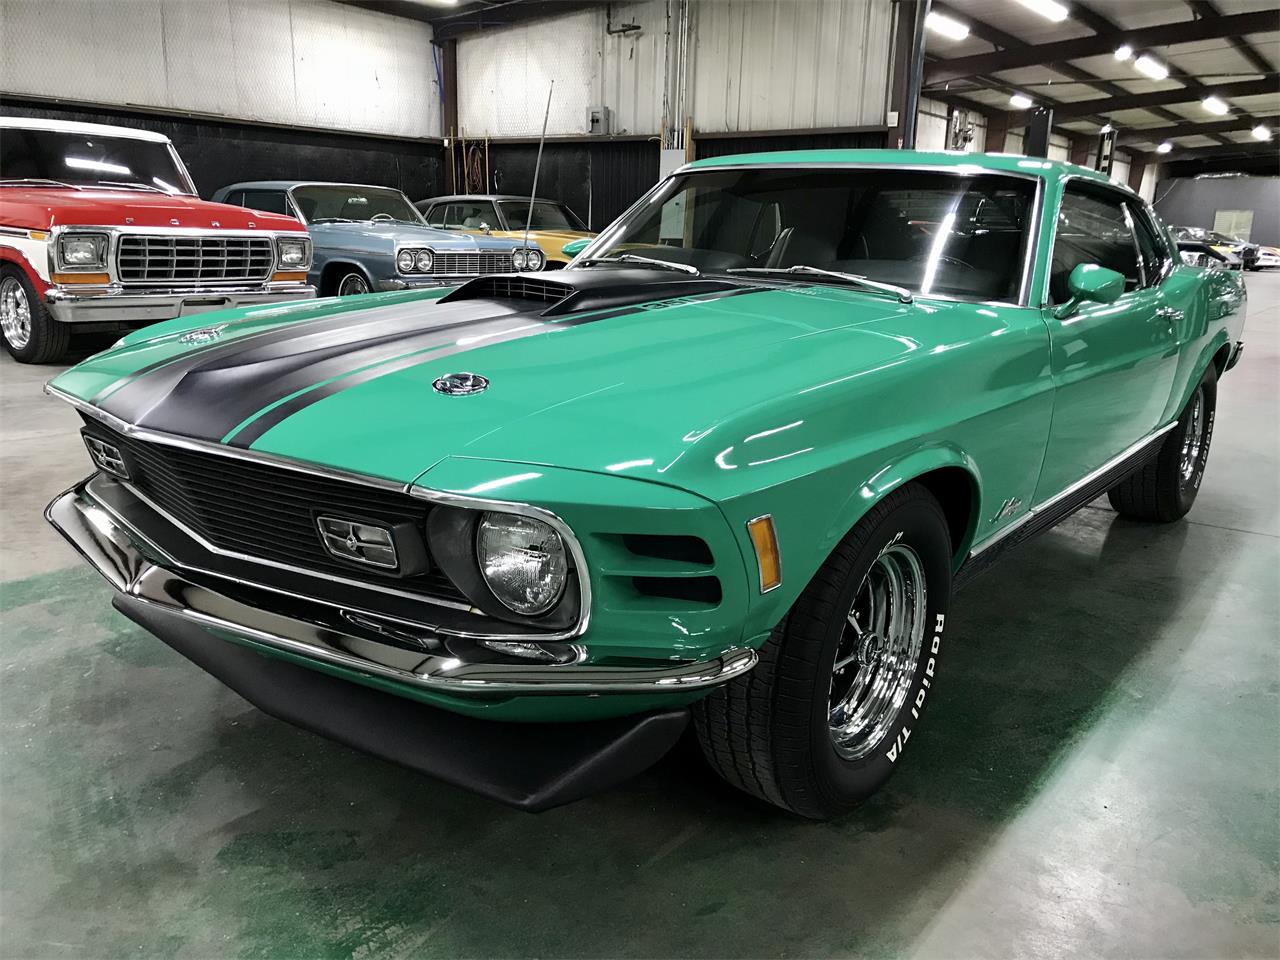 1970 Ford Mustang for Sale | ClassicCars.com | CC-1343638